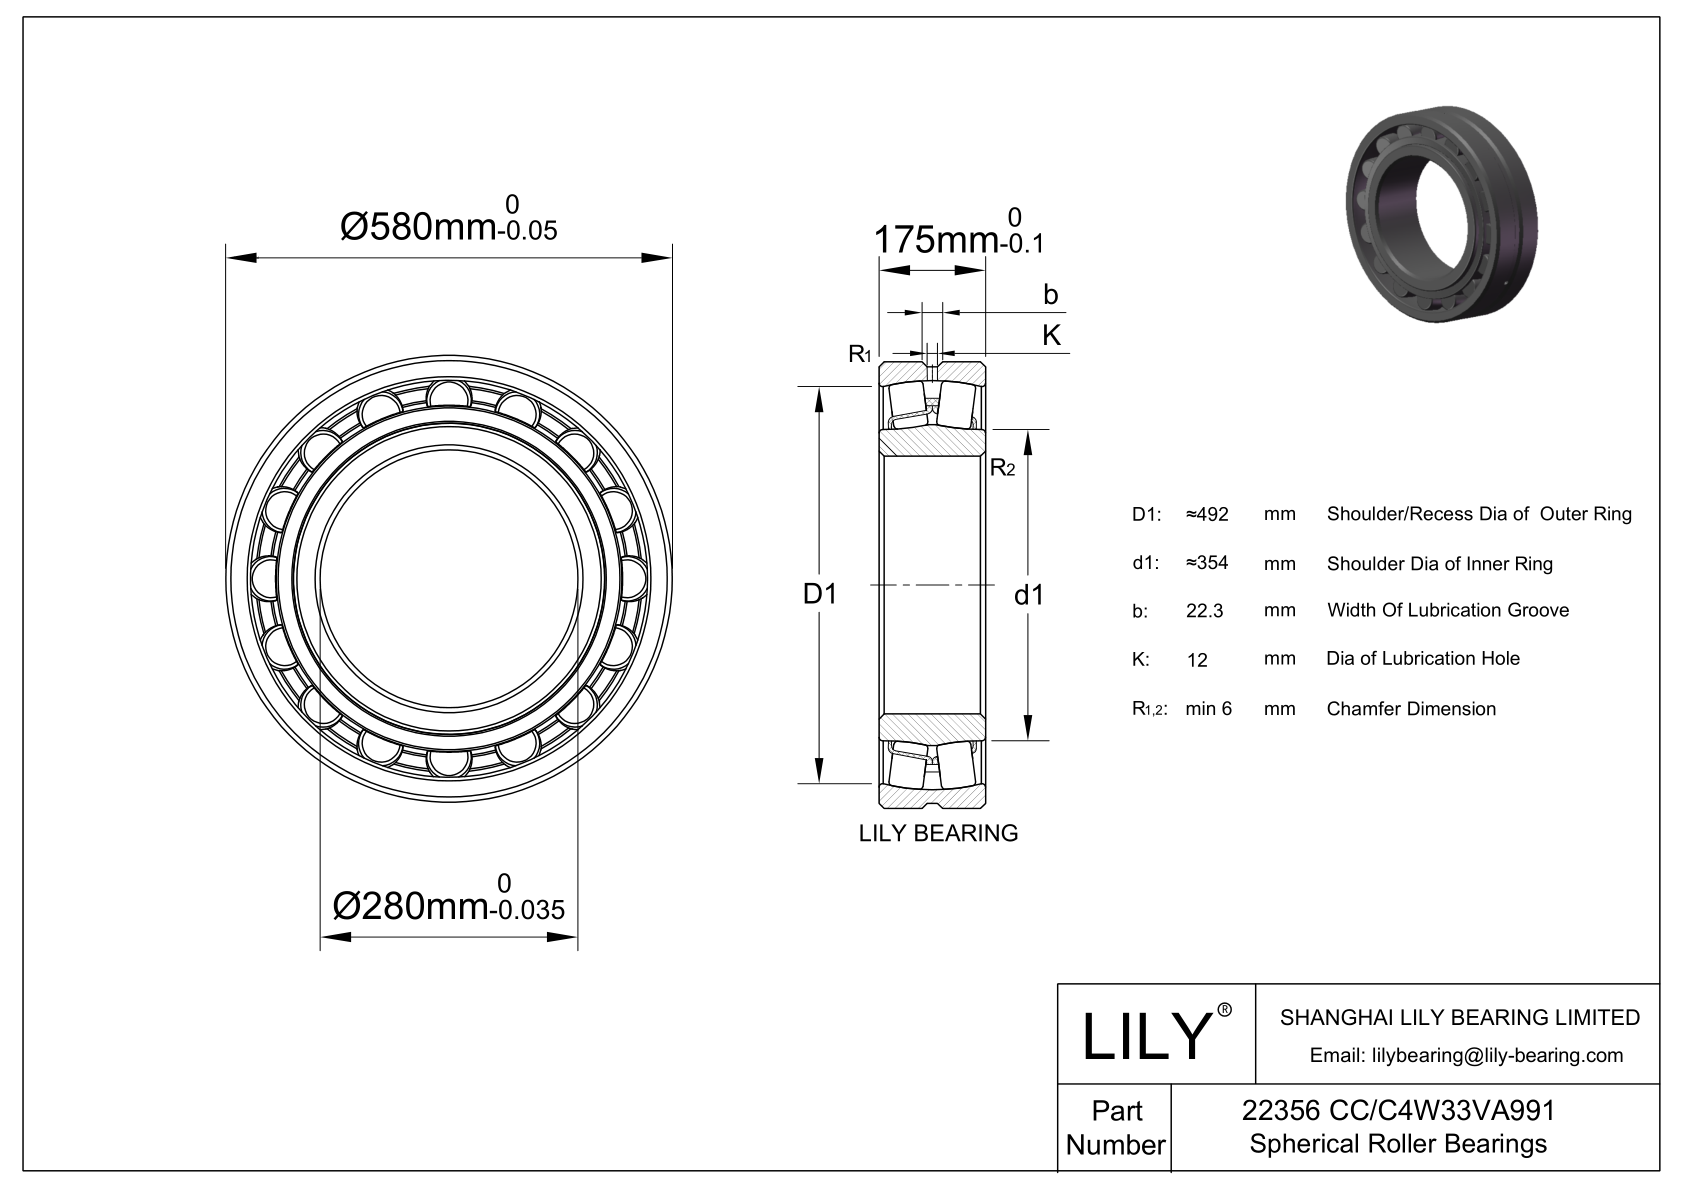 22356 CC/C4W33VA991 Double Row Spherical Roller Bearing cad drawing